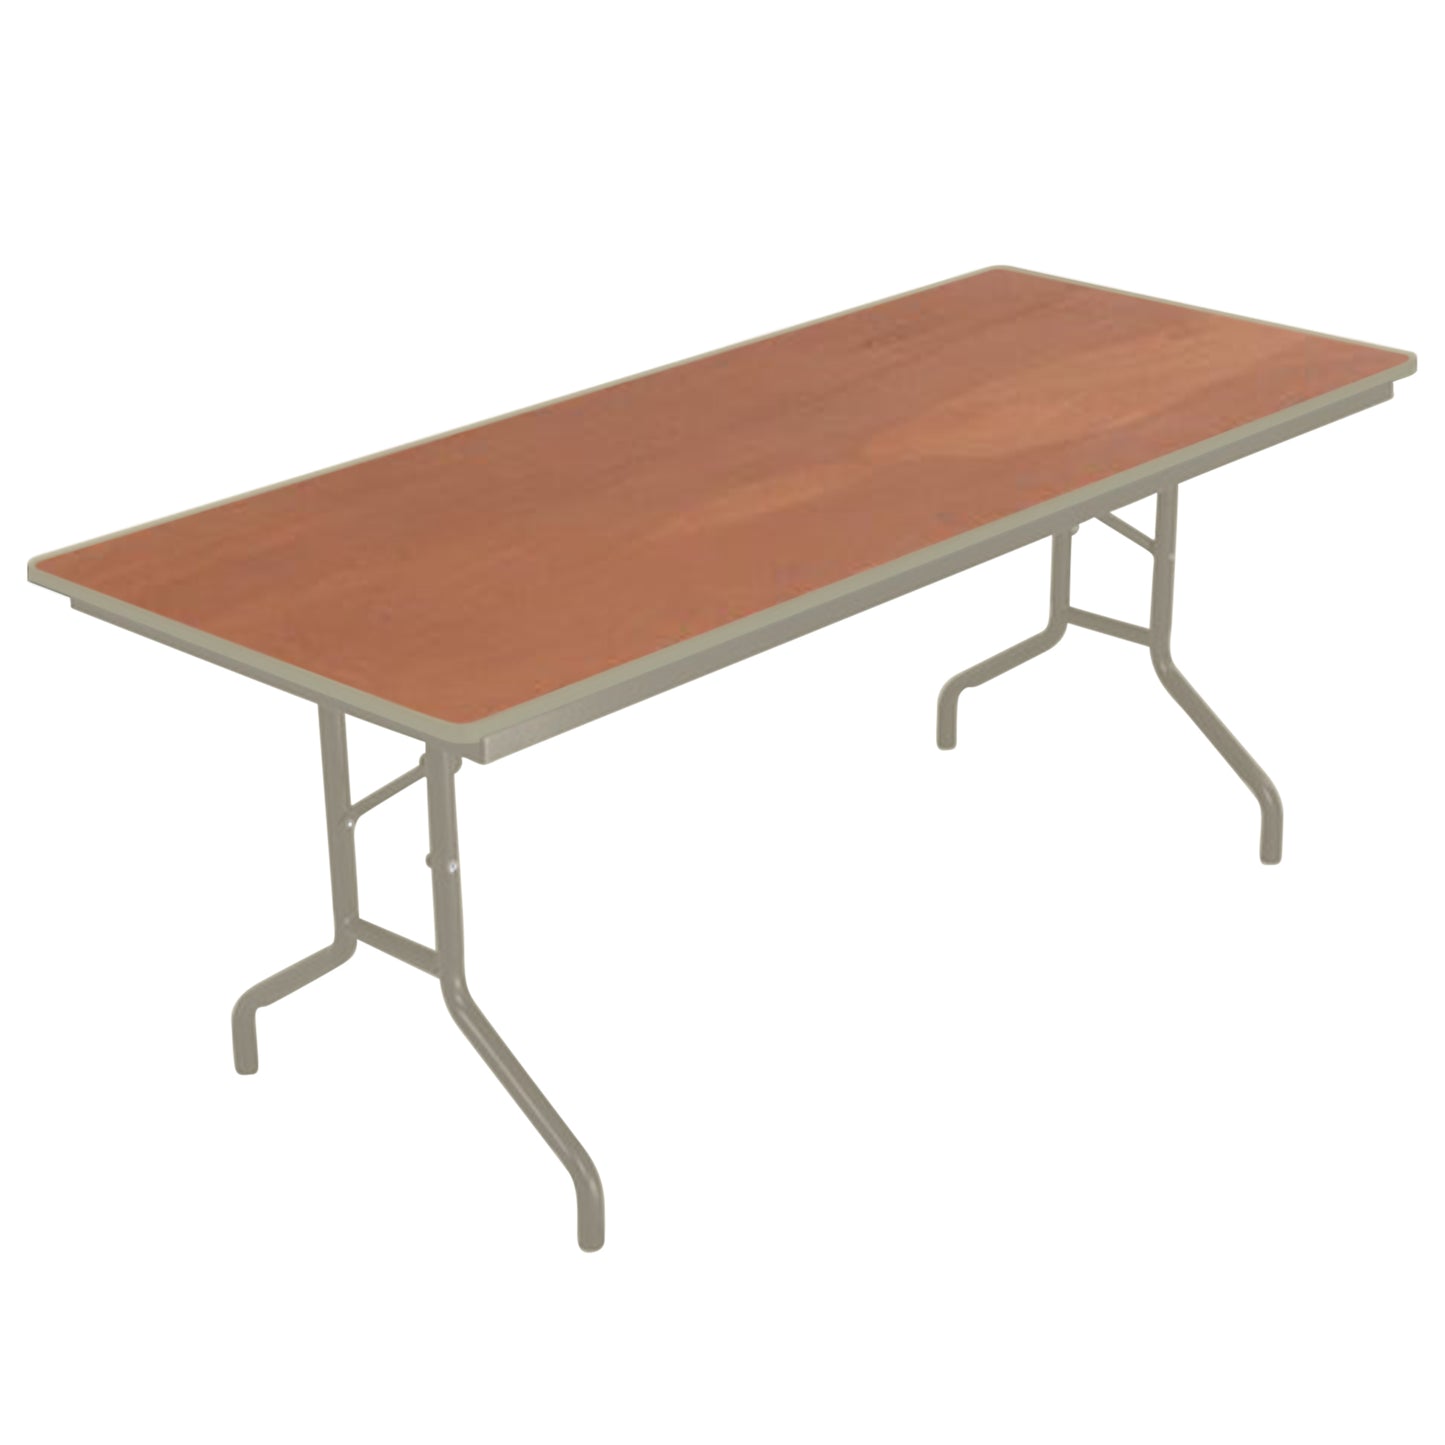 AmTab Folding Table - Plywood Stained and Sealed - Vinyl T-Molding Edge - 30"W x 60"L x 29"H  (AmTab AMT-305PM)